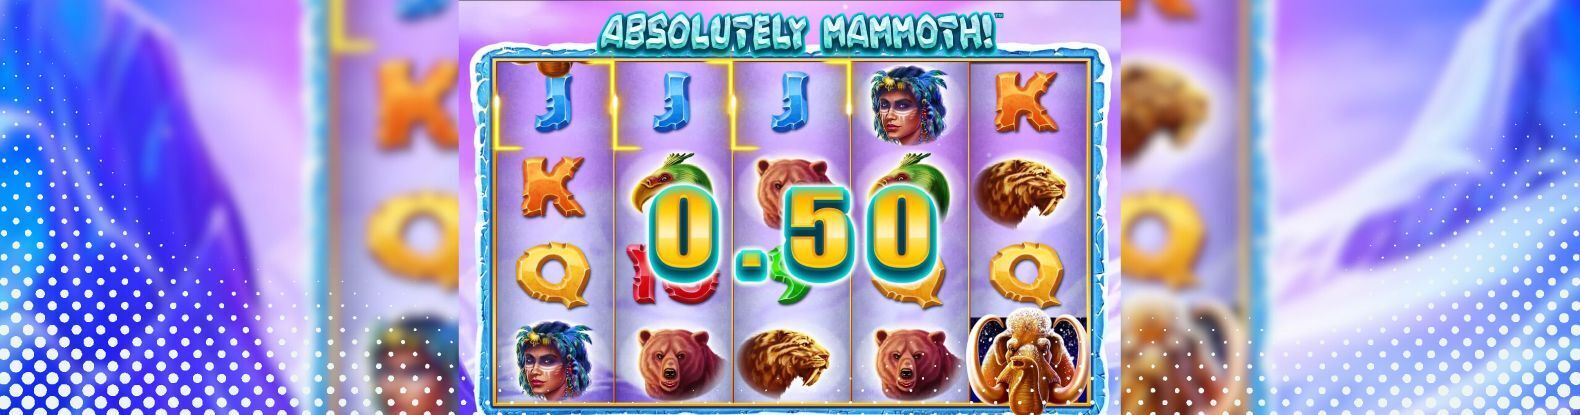 This is a screenshot of Absolutely Mammoth online pokies game by Playtech